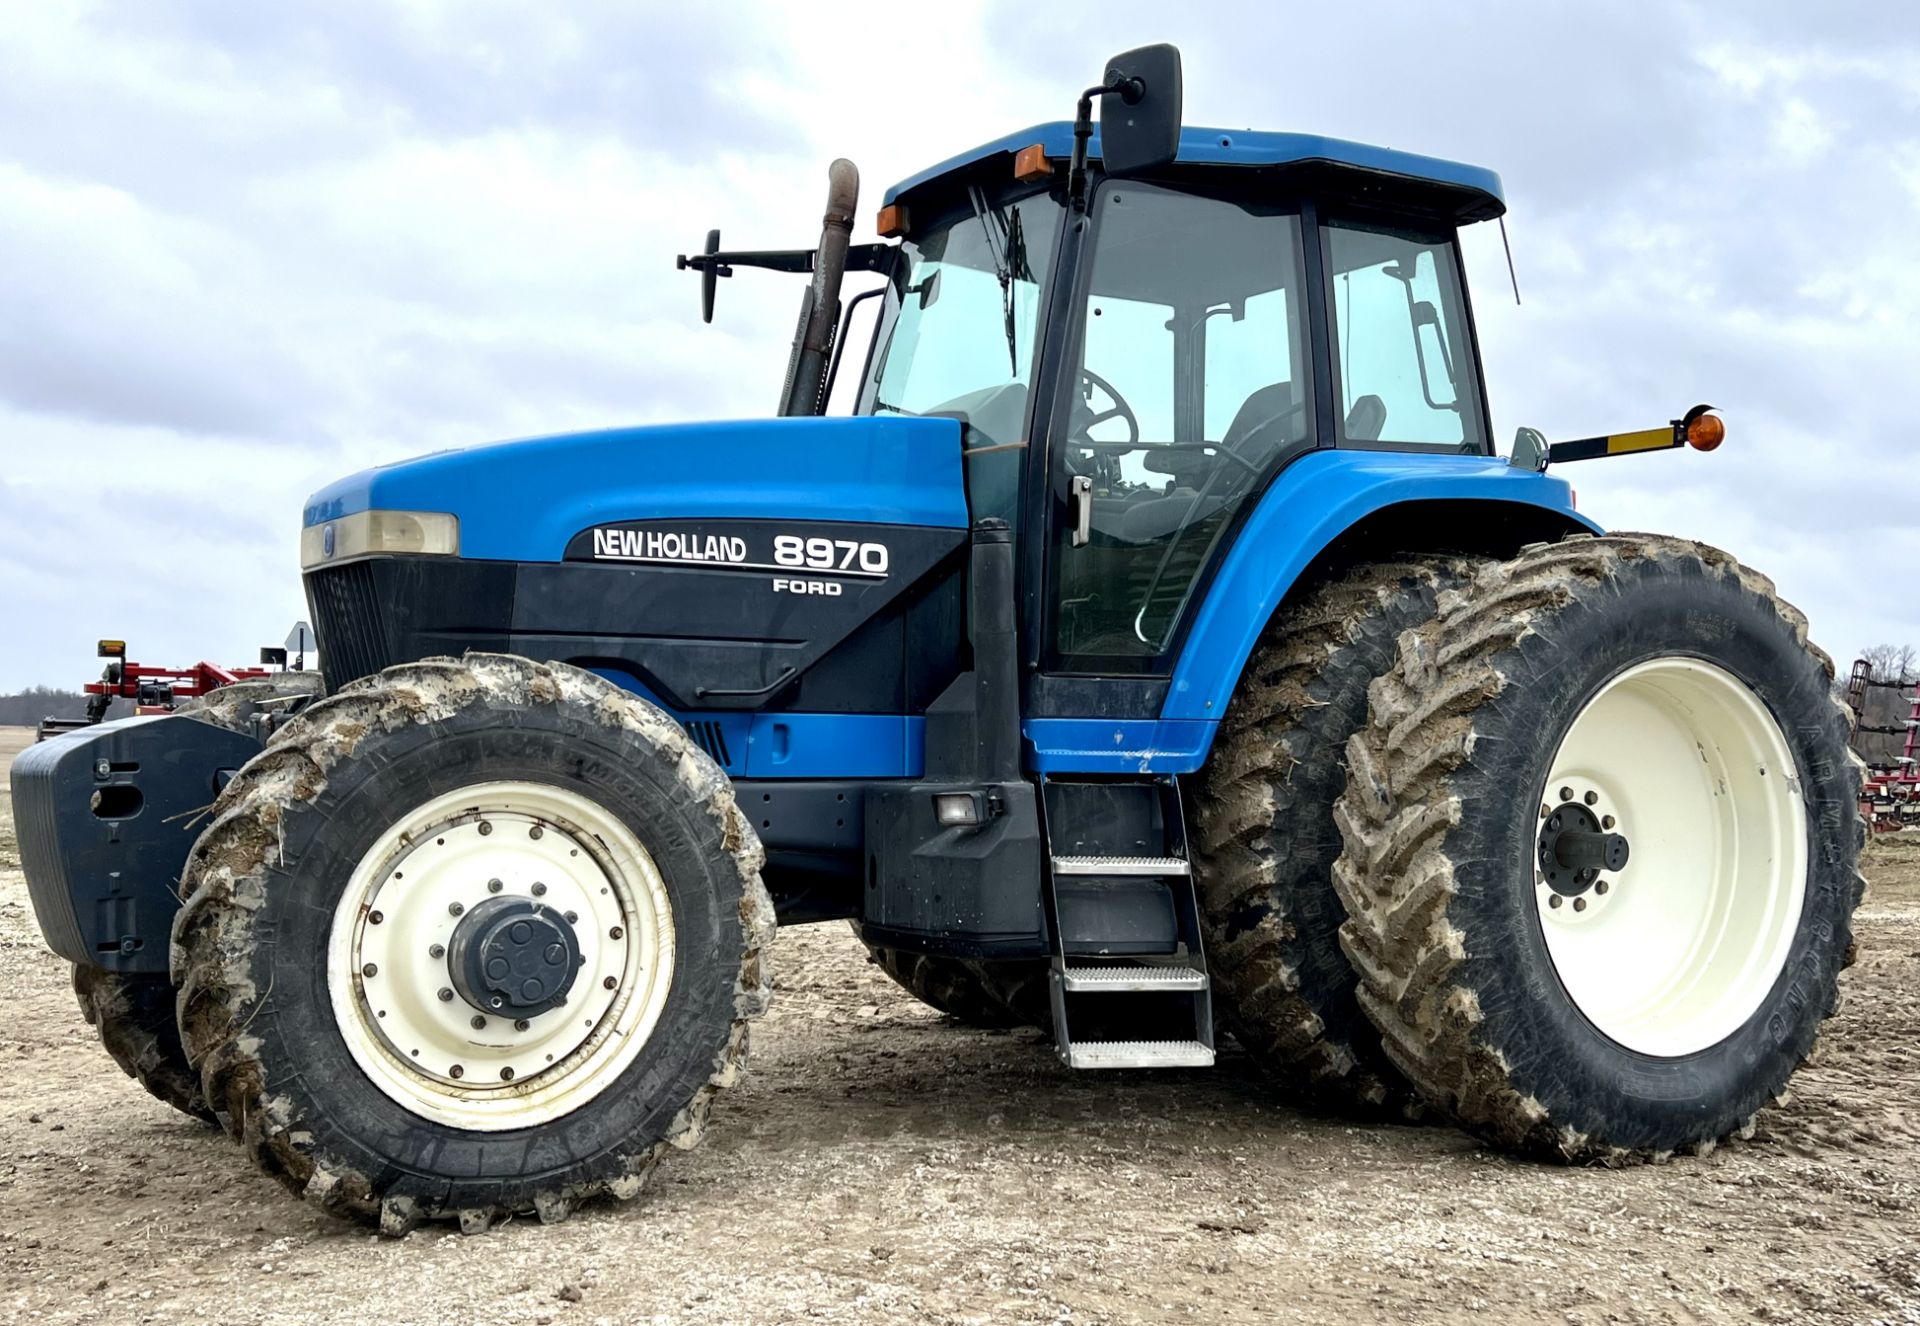 New Holland 8970 Tractor - Image 47 of 48